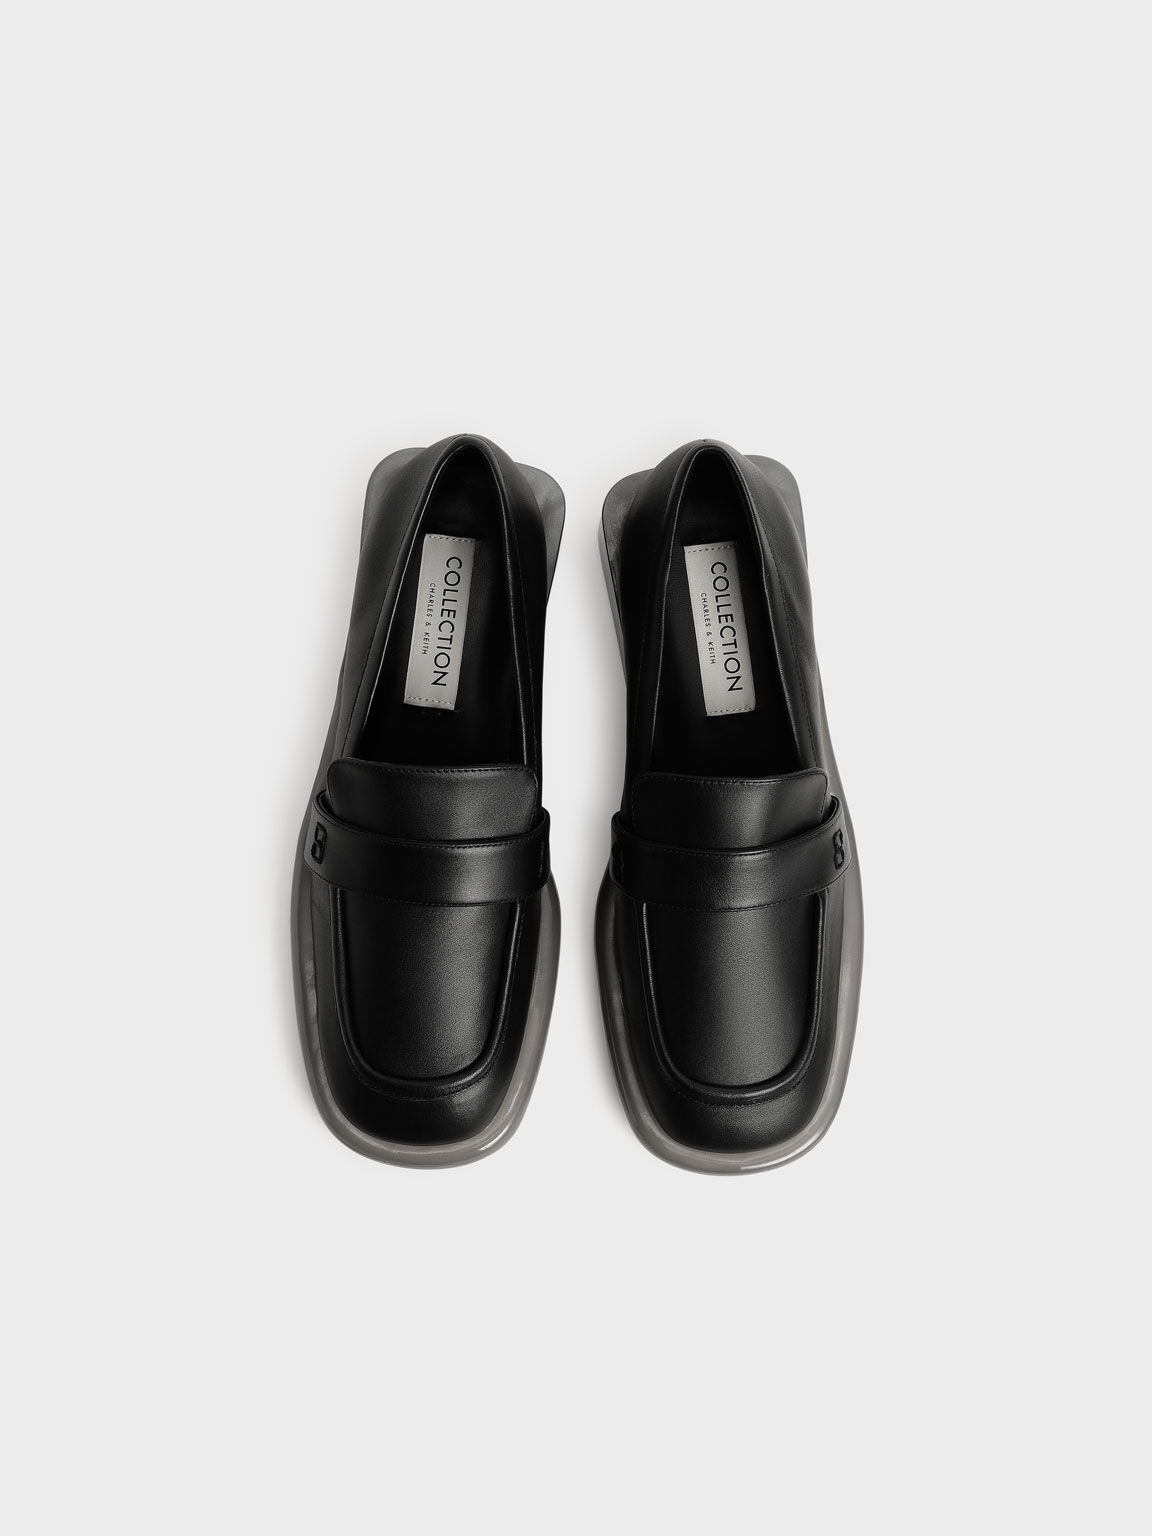 Leather Penny Loafers, Black, hi-res